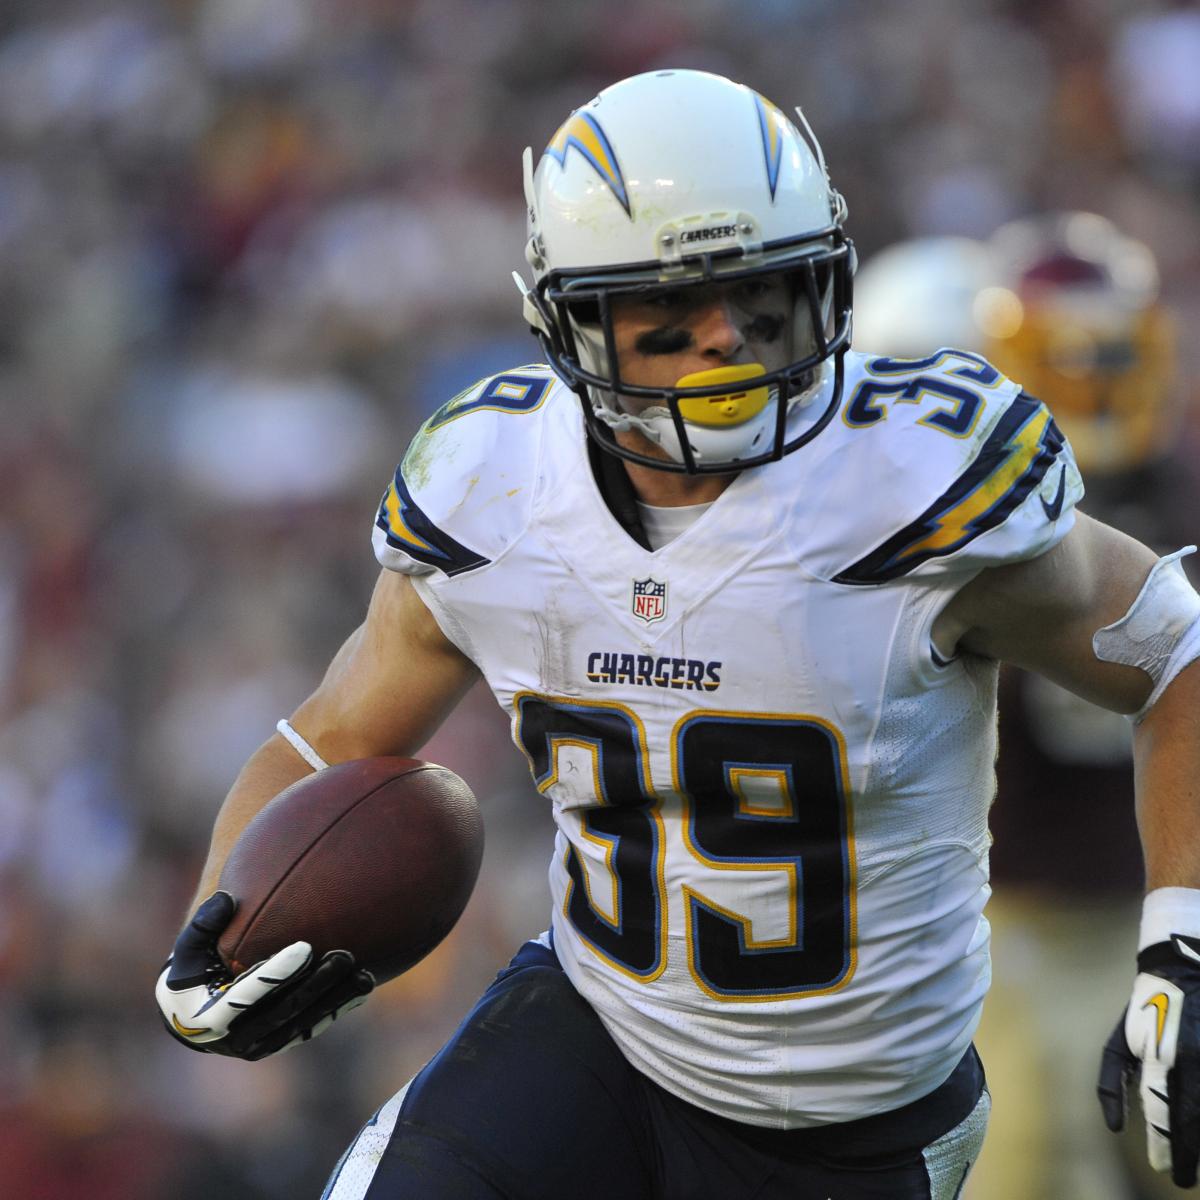 Danny Woodhead Injury Update: Chargers RB Diagnosed with Torn ACL ...